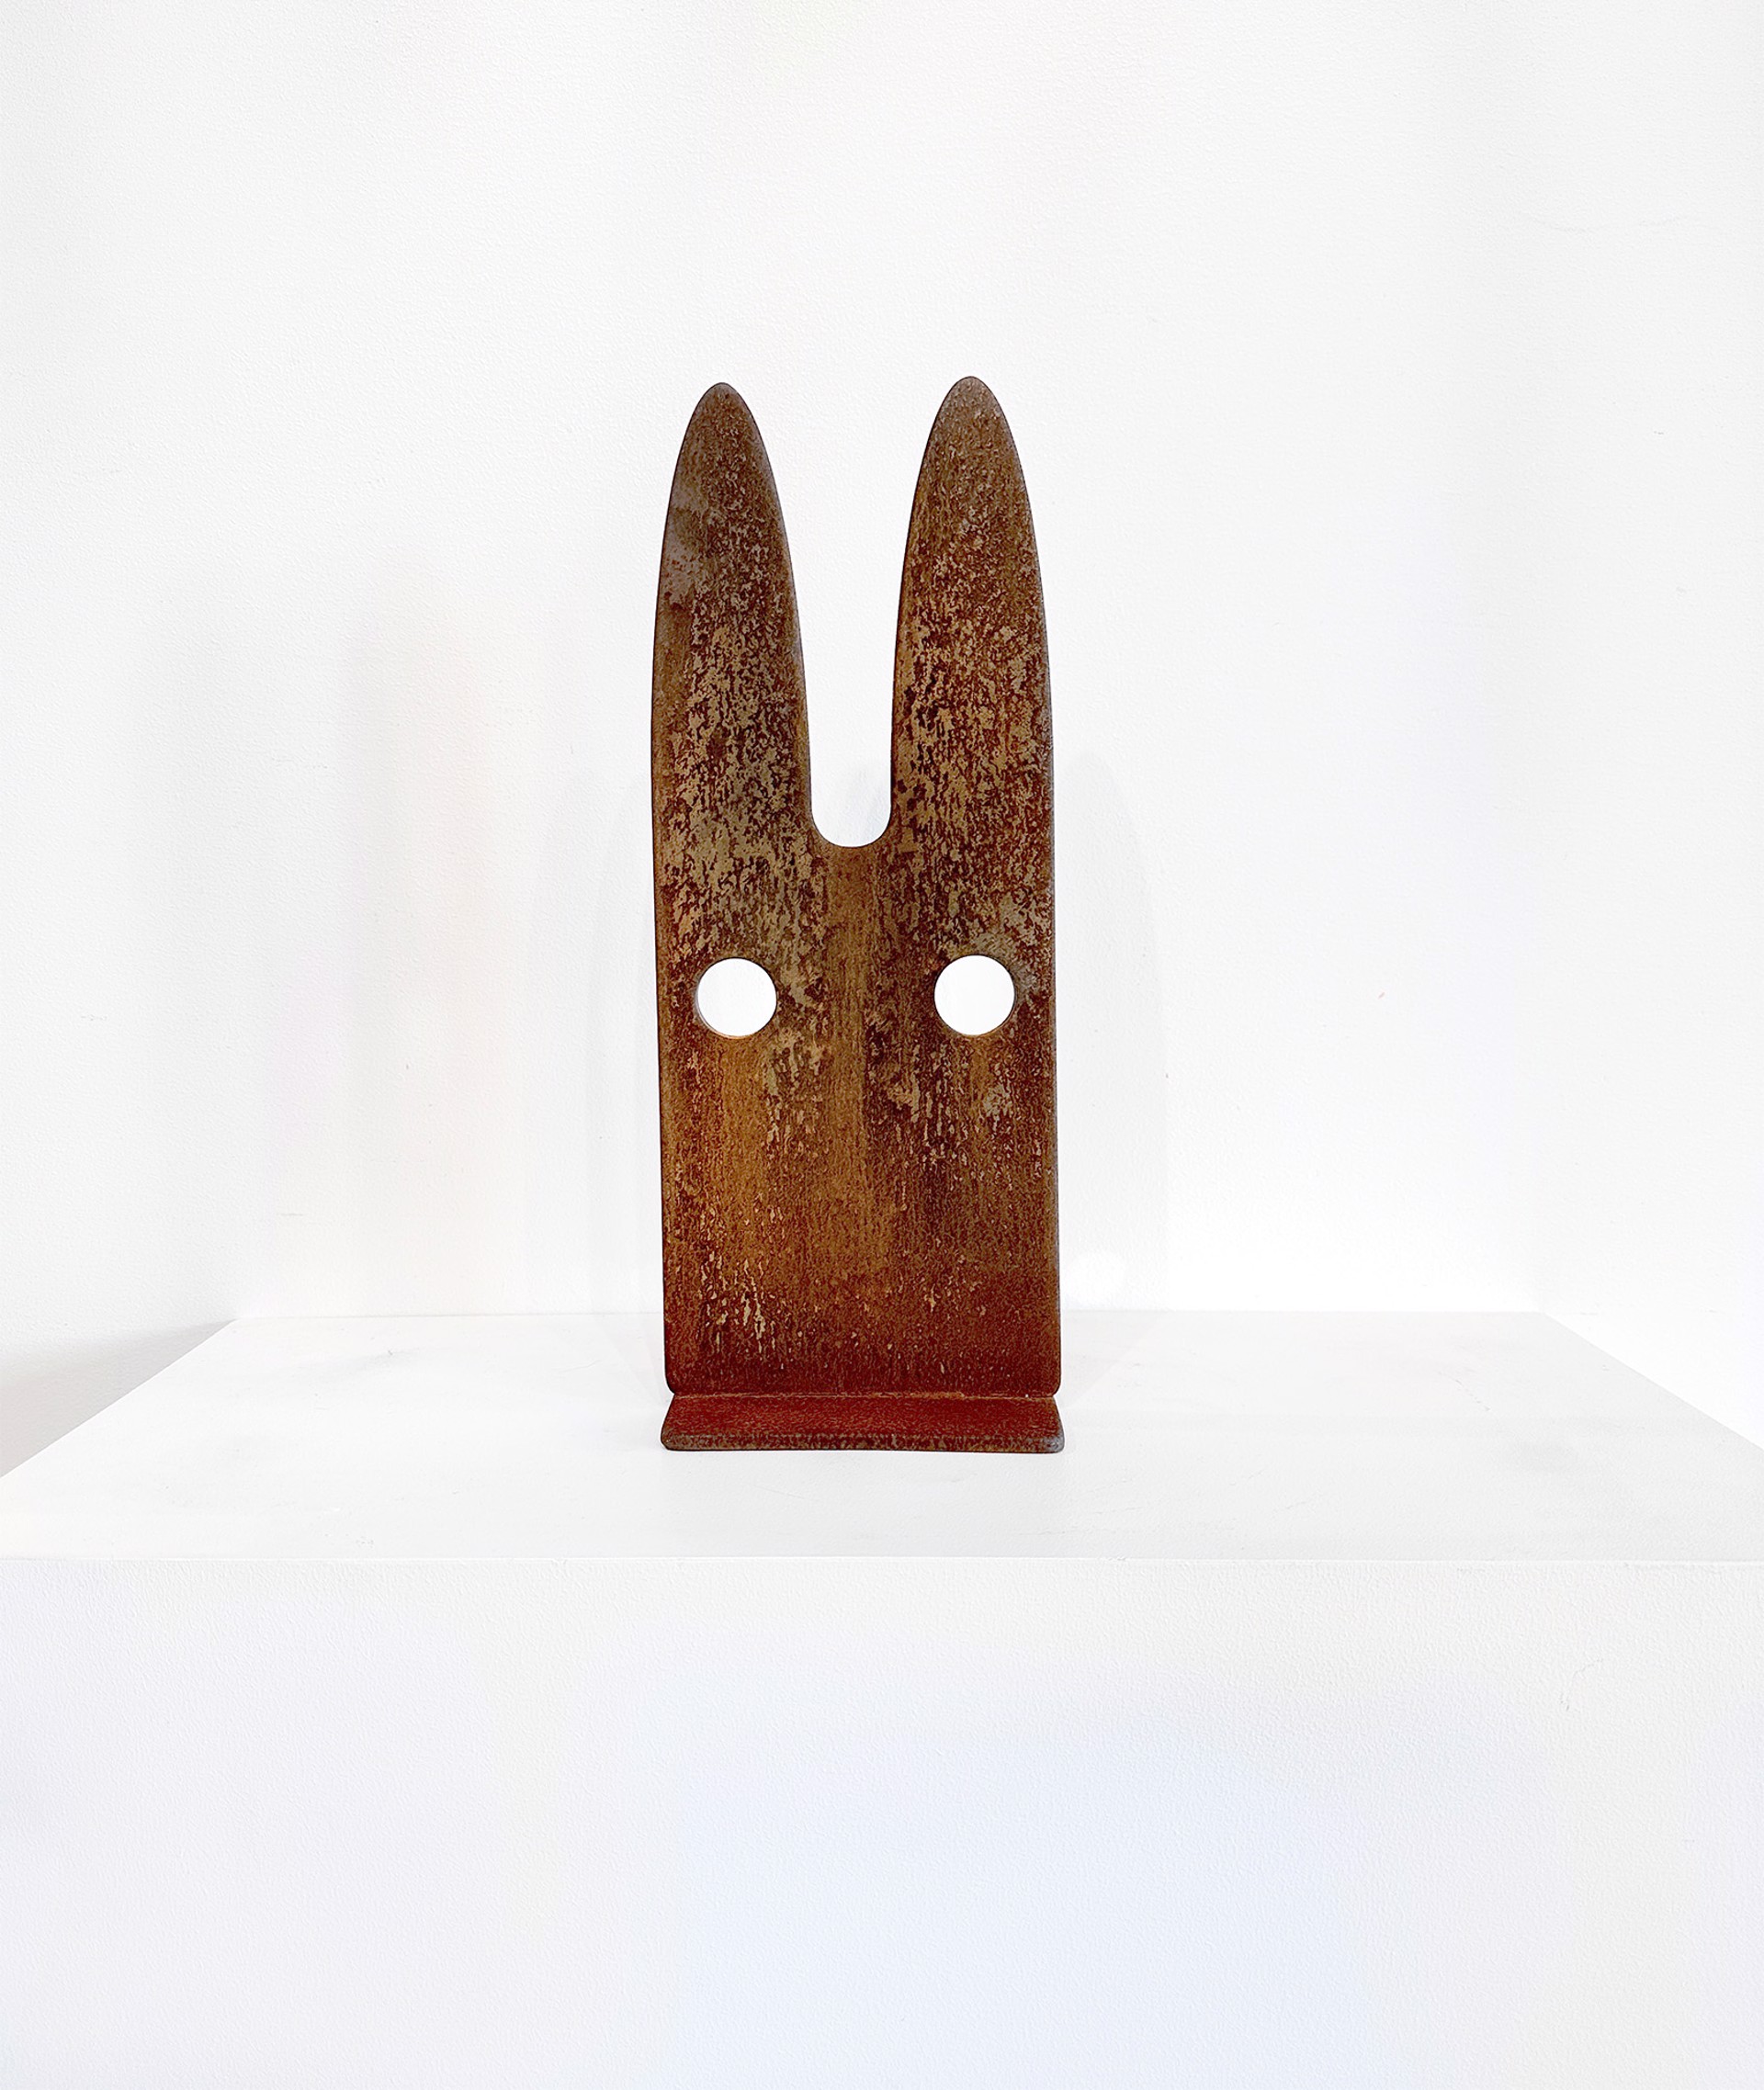 Steel Sculpture By Jeffie Brewer Featuring An Abstracted Bunny In Simplified Shapes 